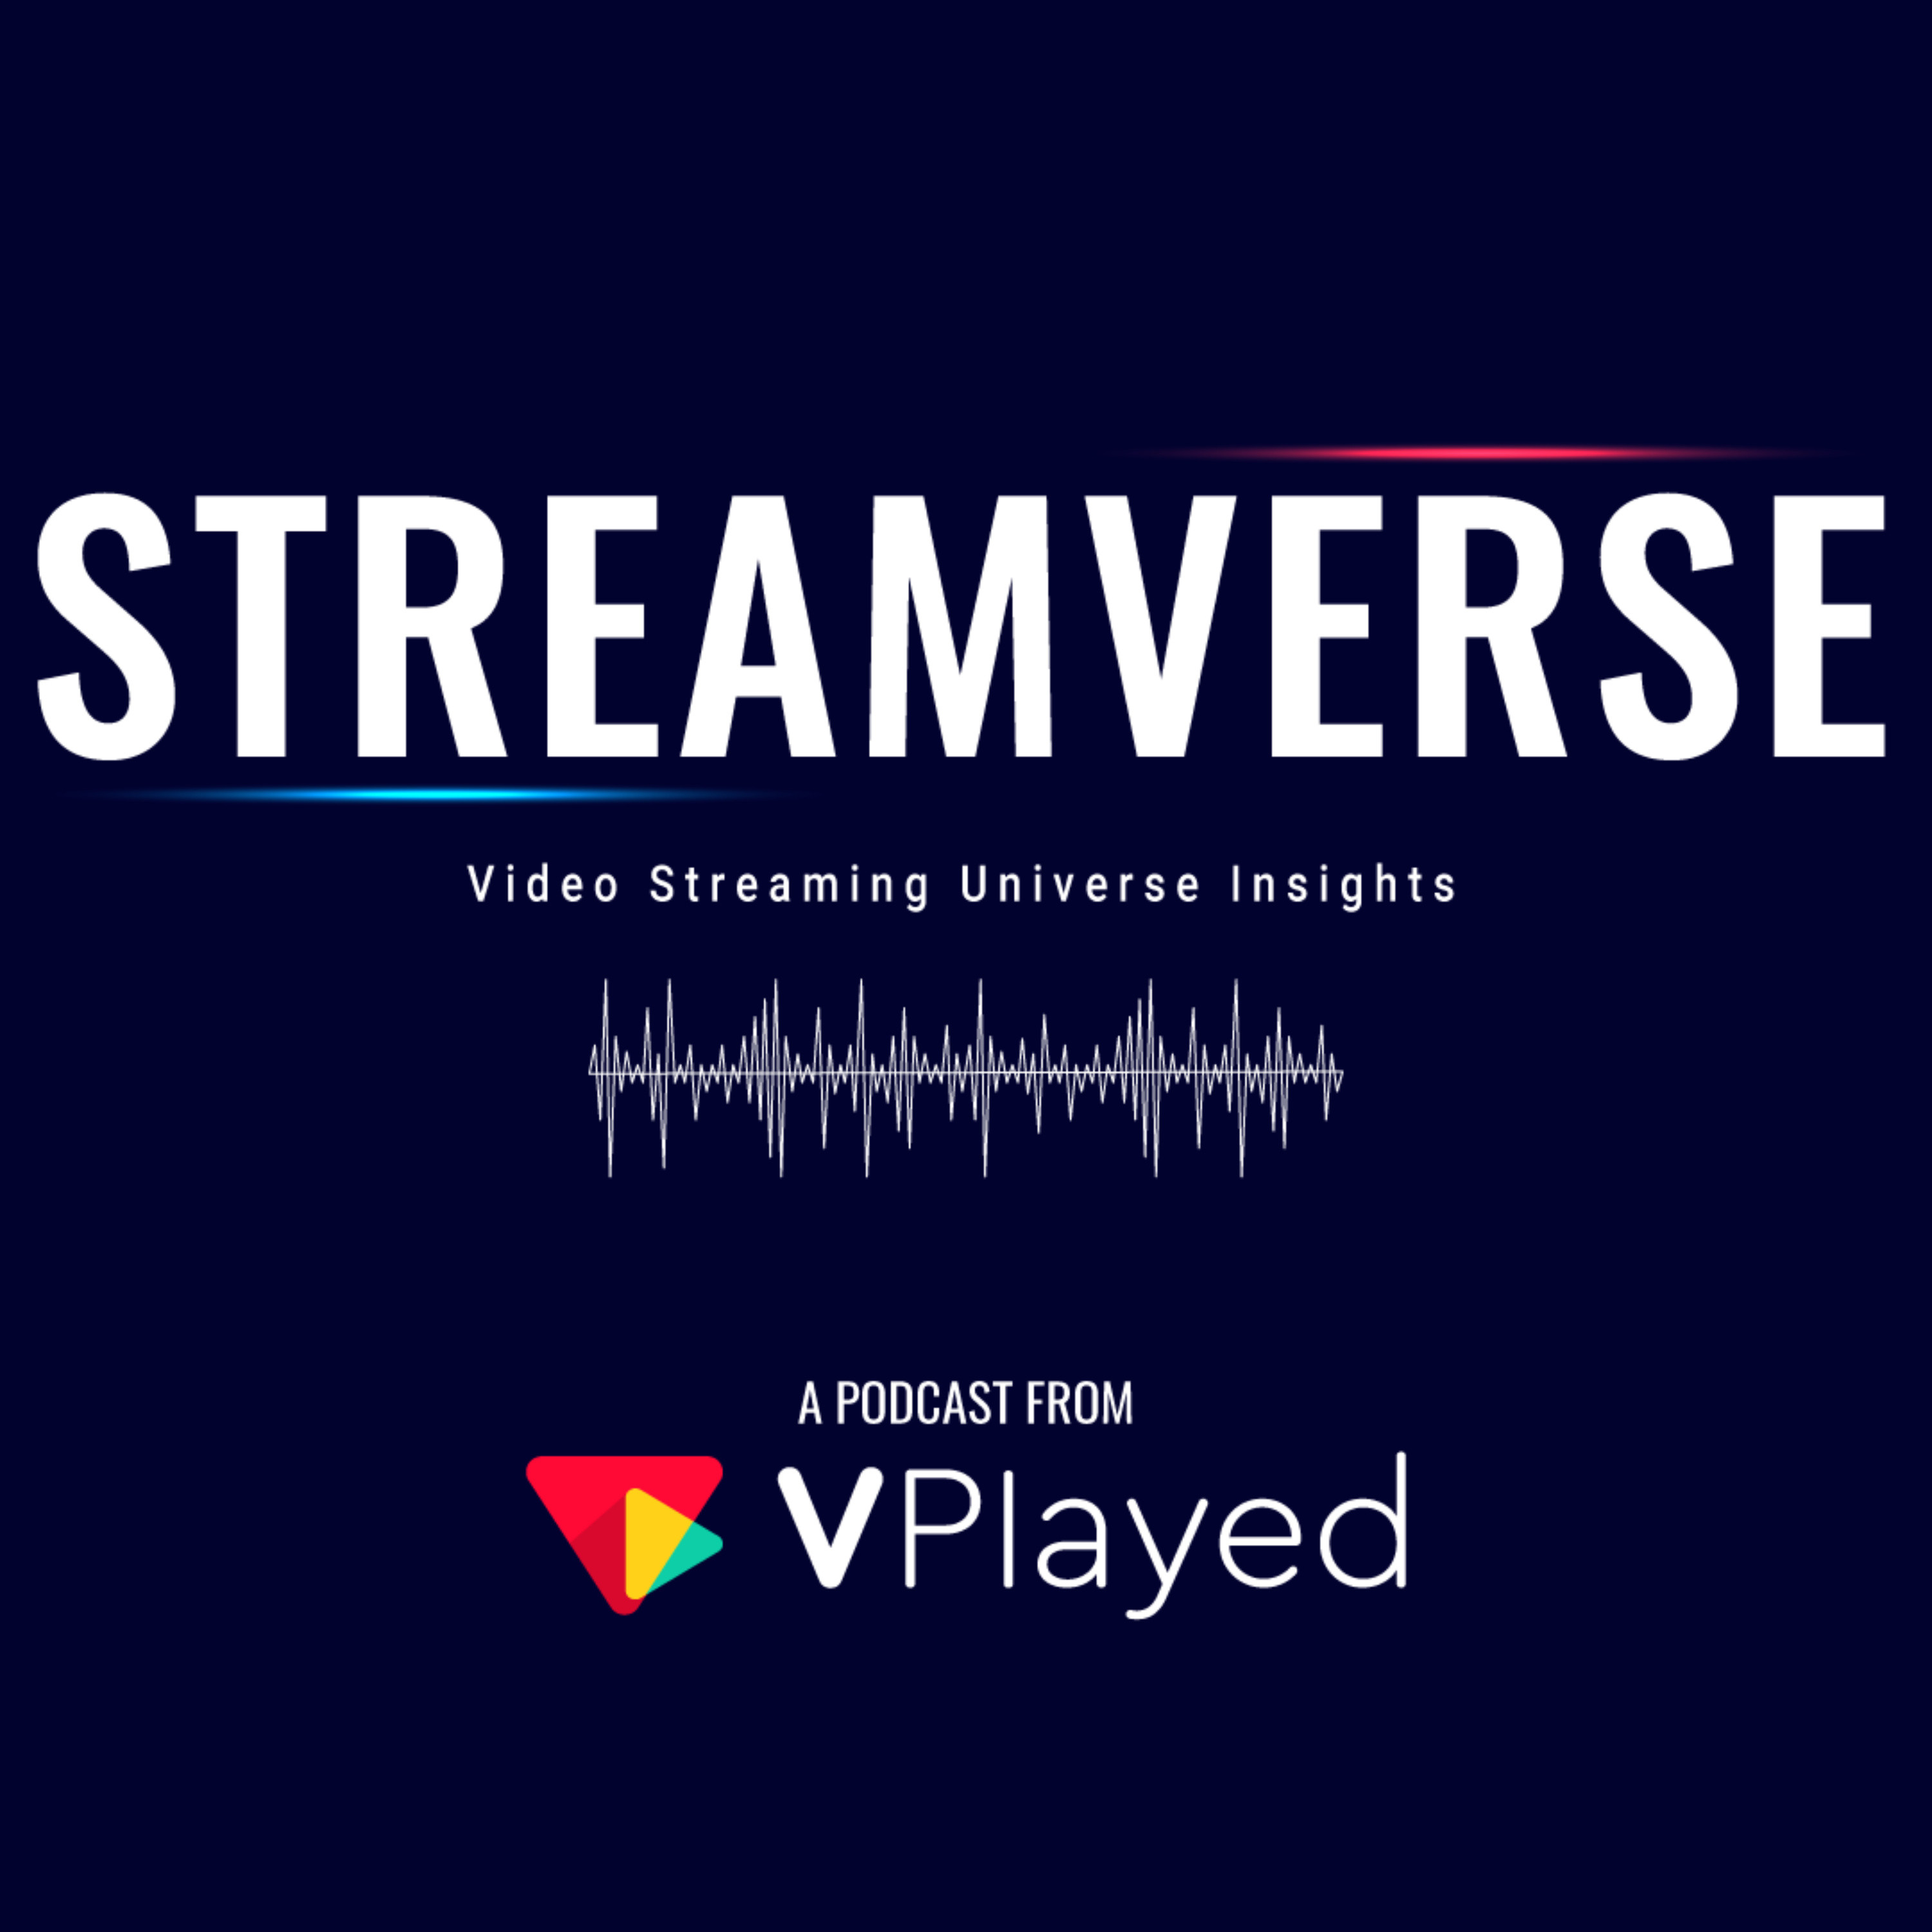 Streamverse - The Video Streaming Podcast | VPlayed